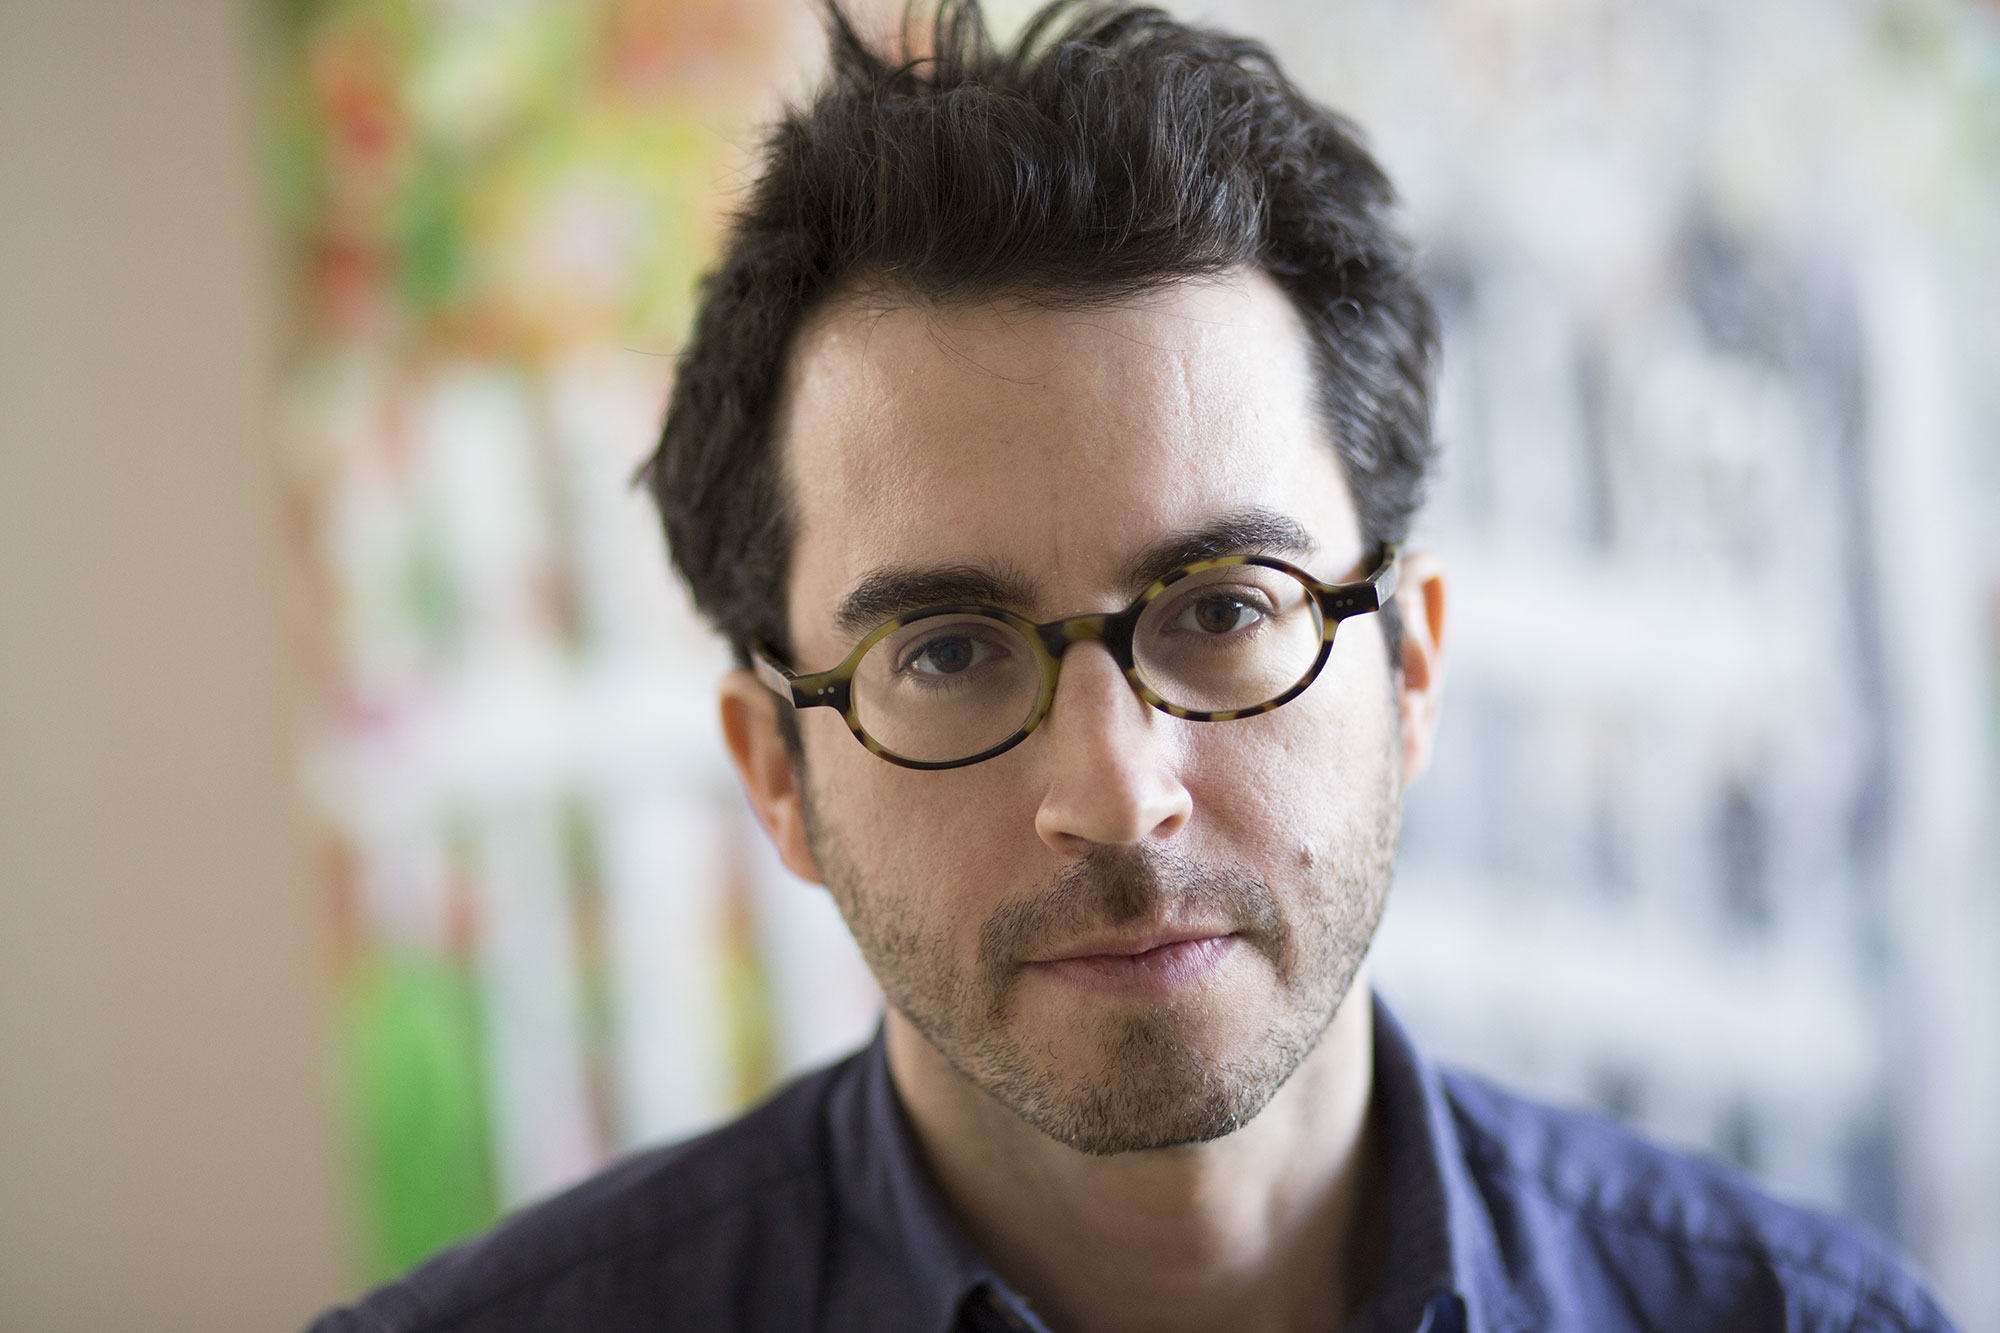 Jonathan Safran Foer is the author of “Here I Am” and other books. (Jeff Mermelstein)